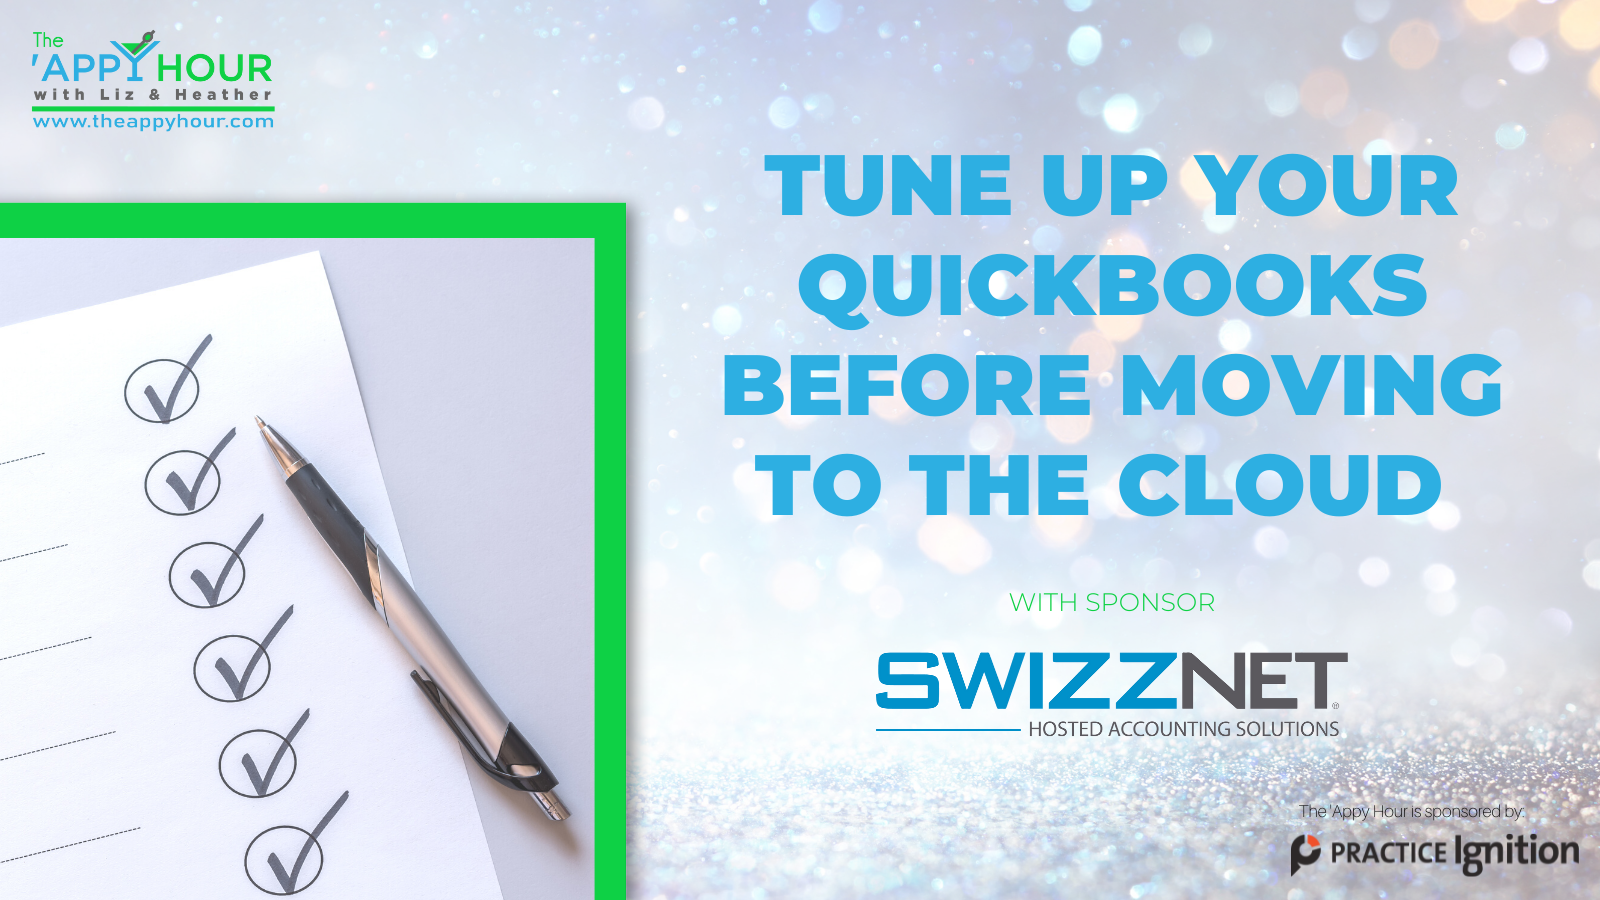 Tune up your QuickBooks before Moving to the Cloud with Swizznet